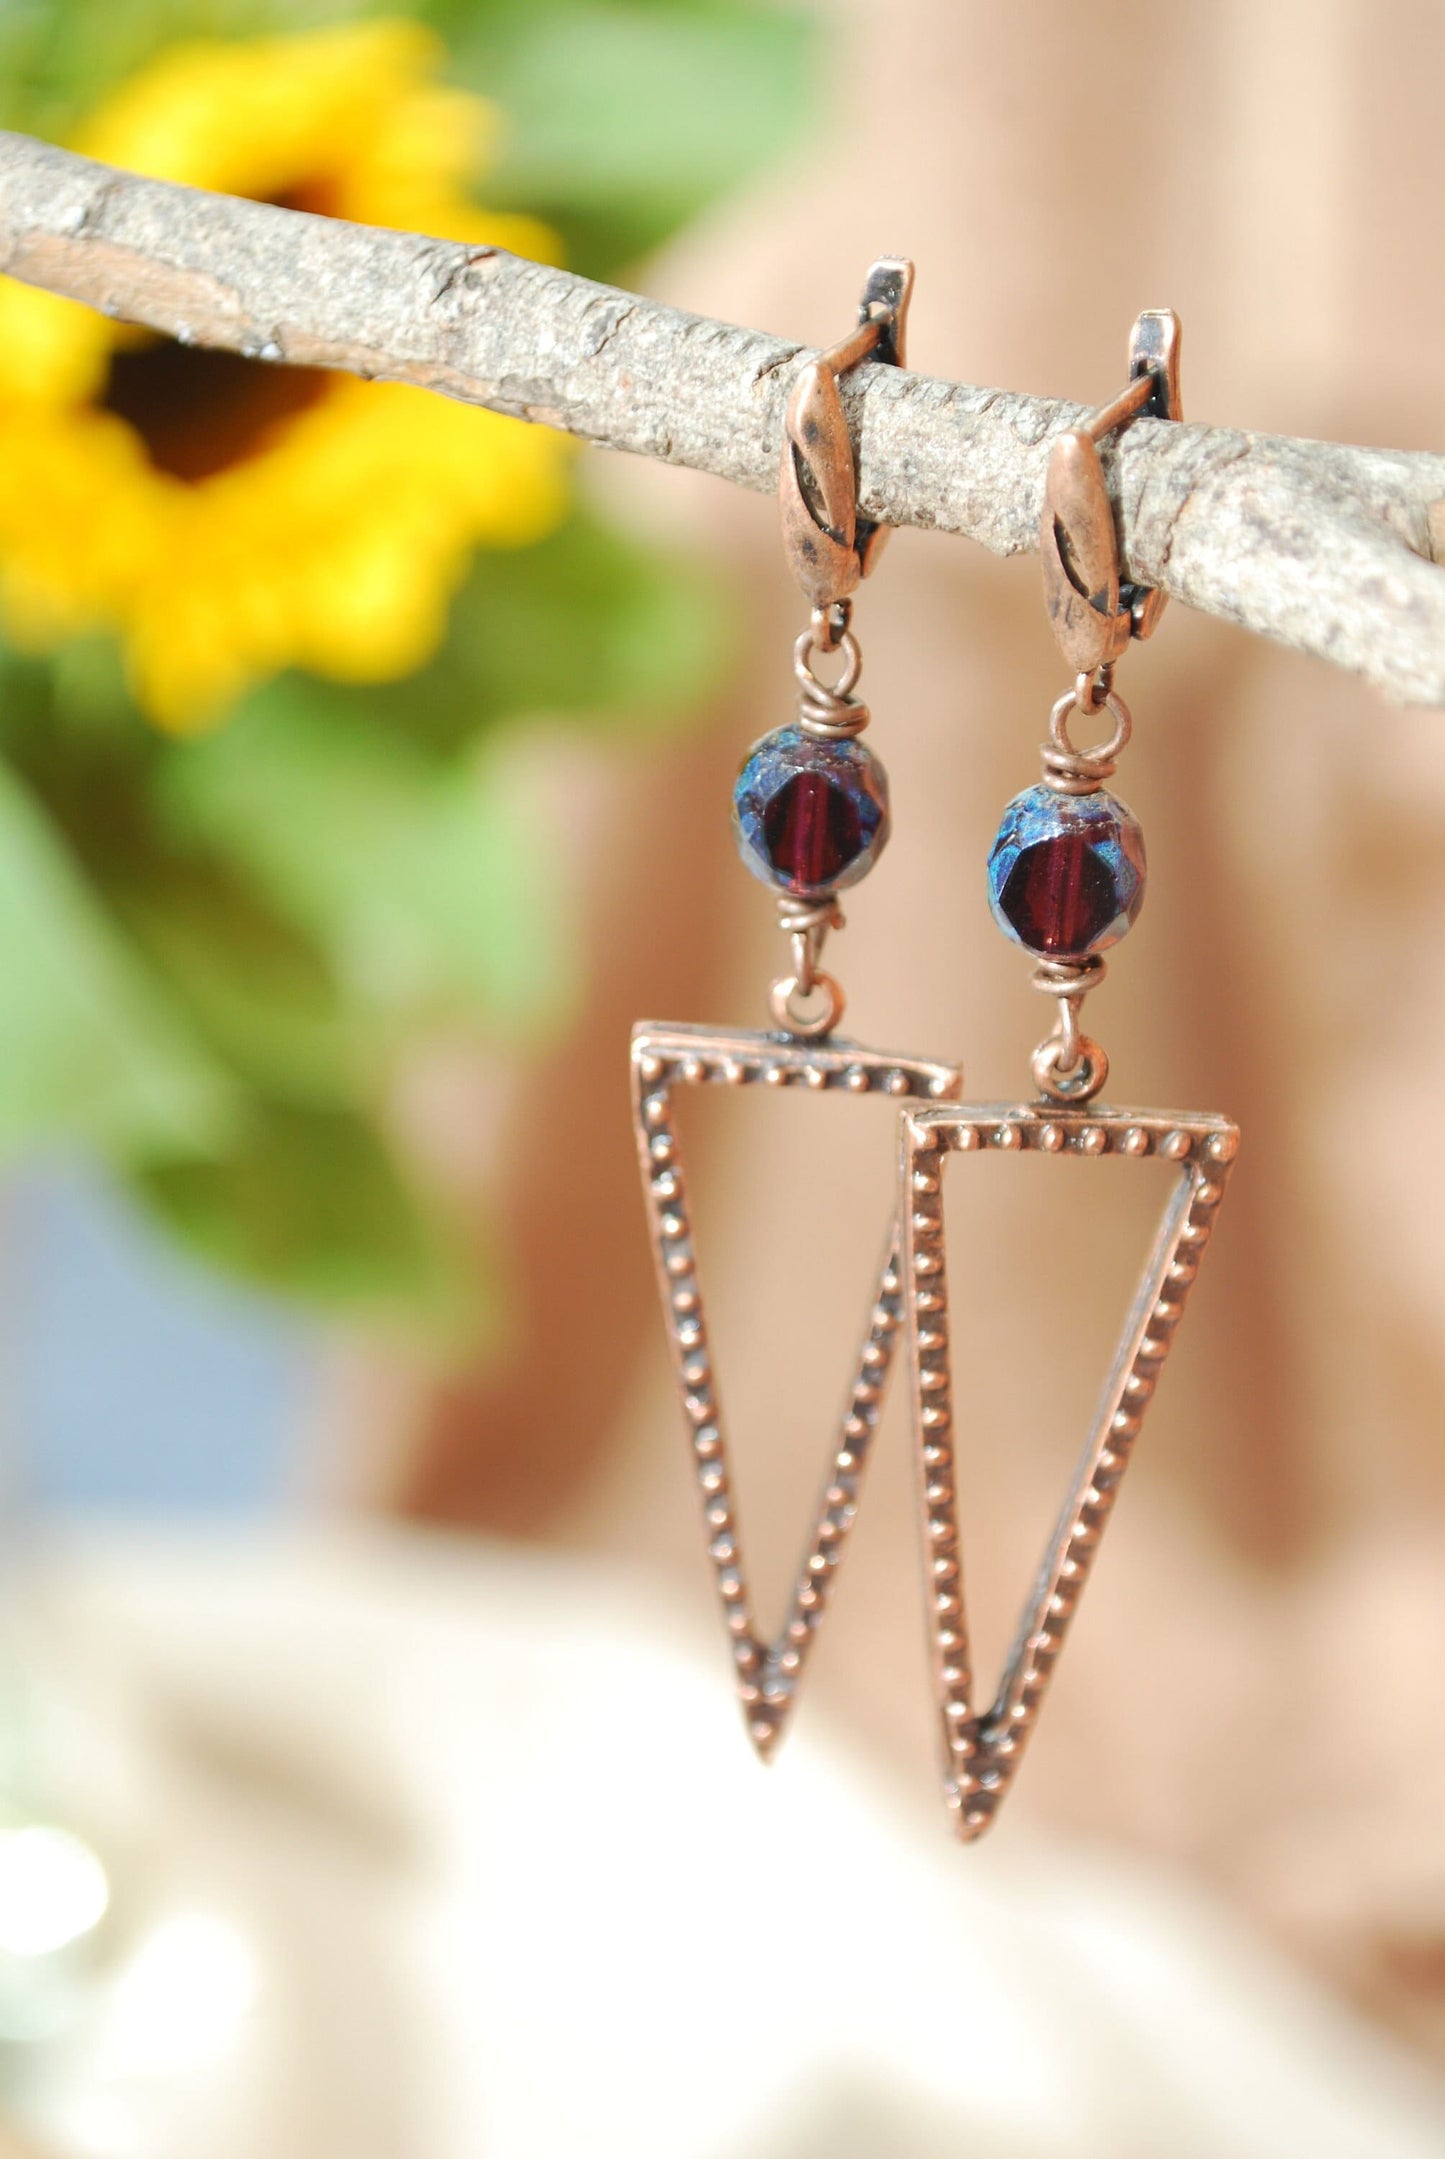 Handcrafted Boho Copper Earrings with Czech Glass Beads: Unique Artisan Jewelry for Bohemian Fashion Statement!  7.5cm - 3". Estibela design